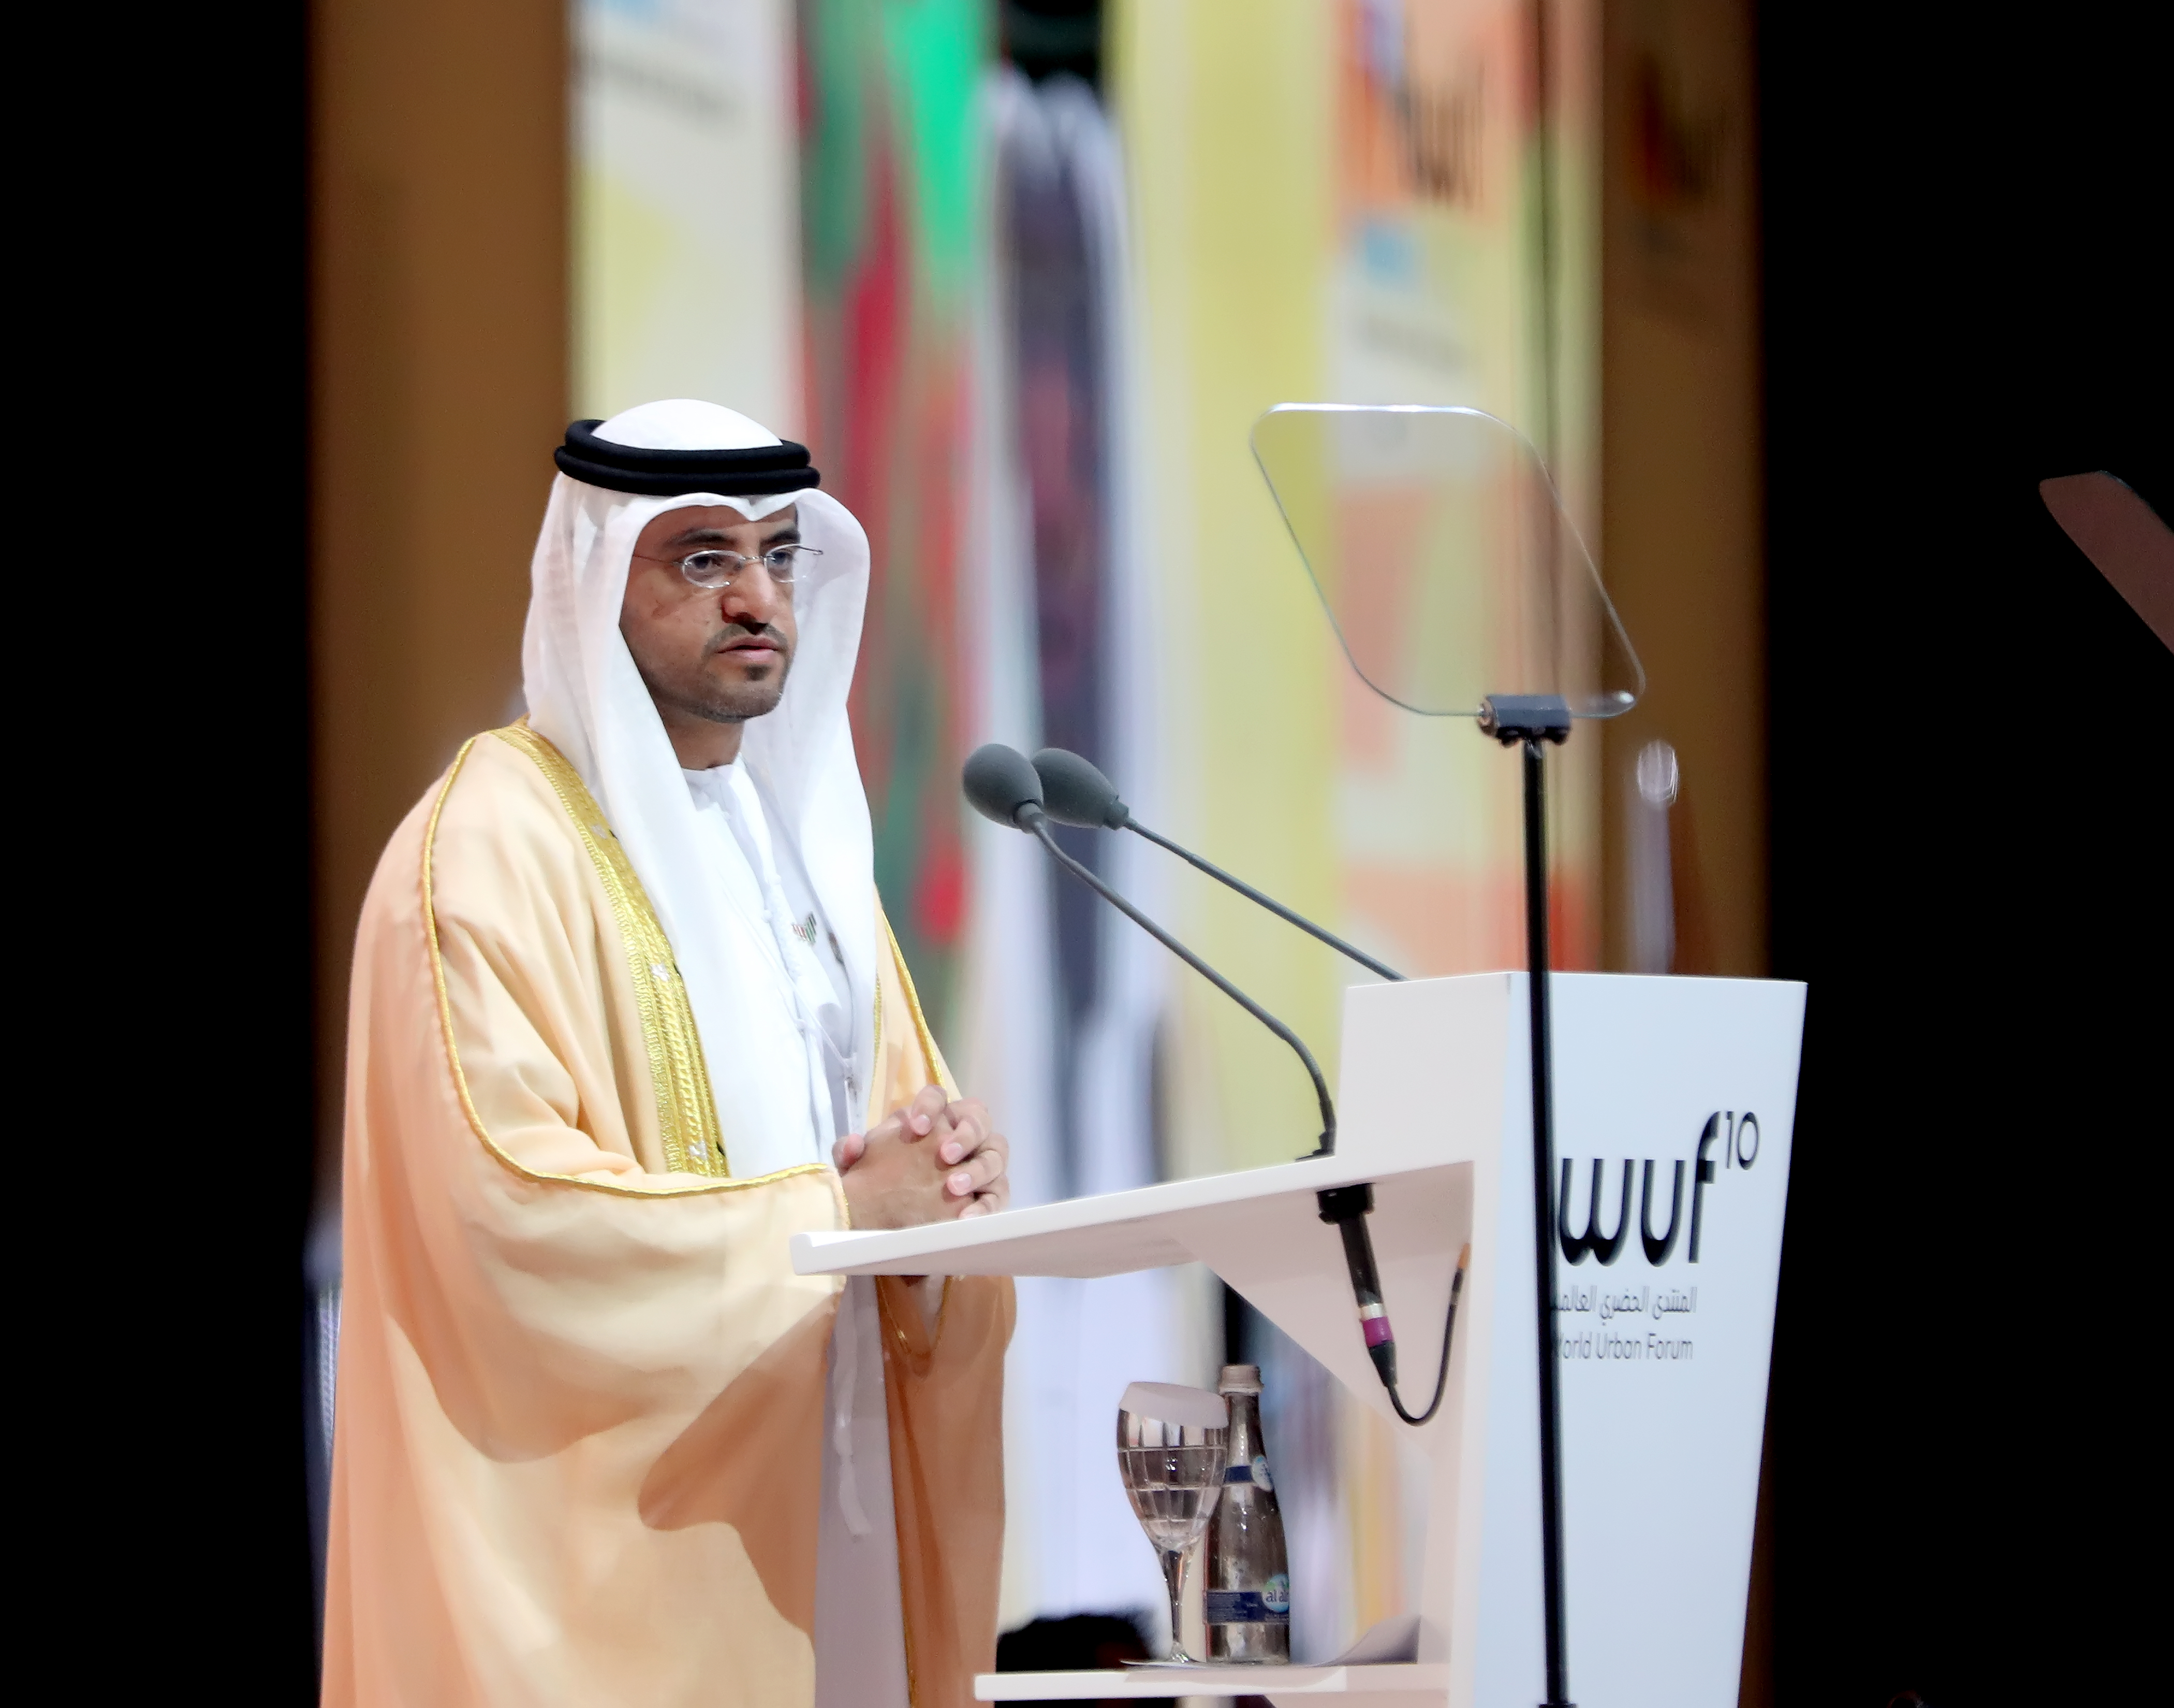 Tenth World Urban Forum officially opens with a high level, colourful ceremony